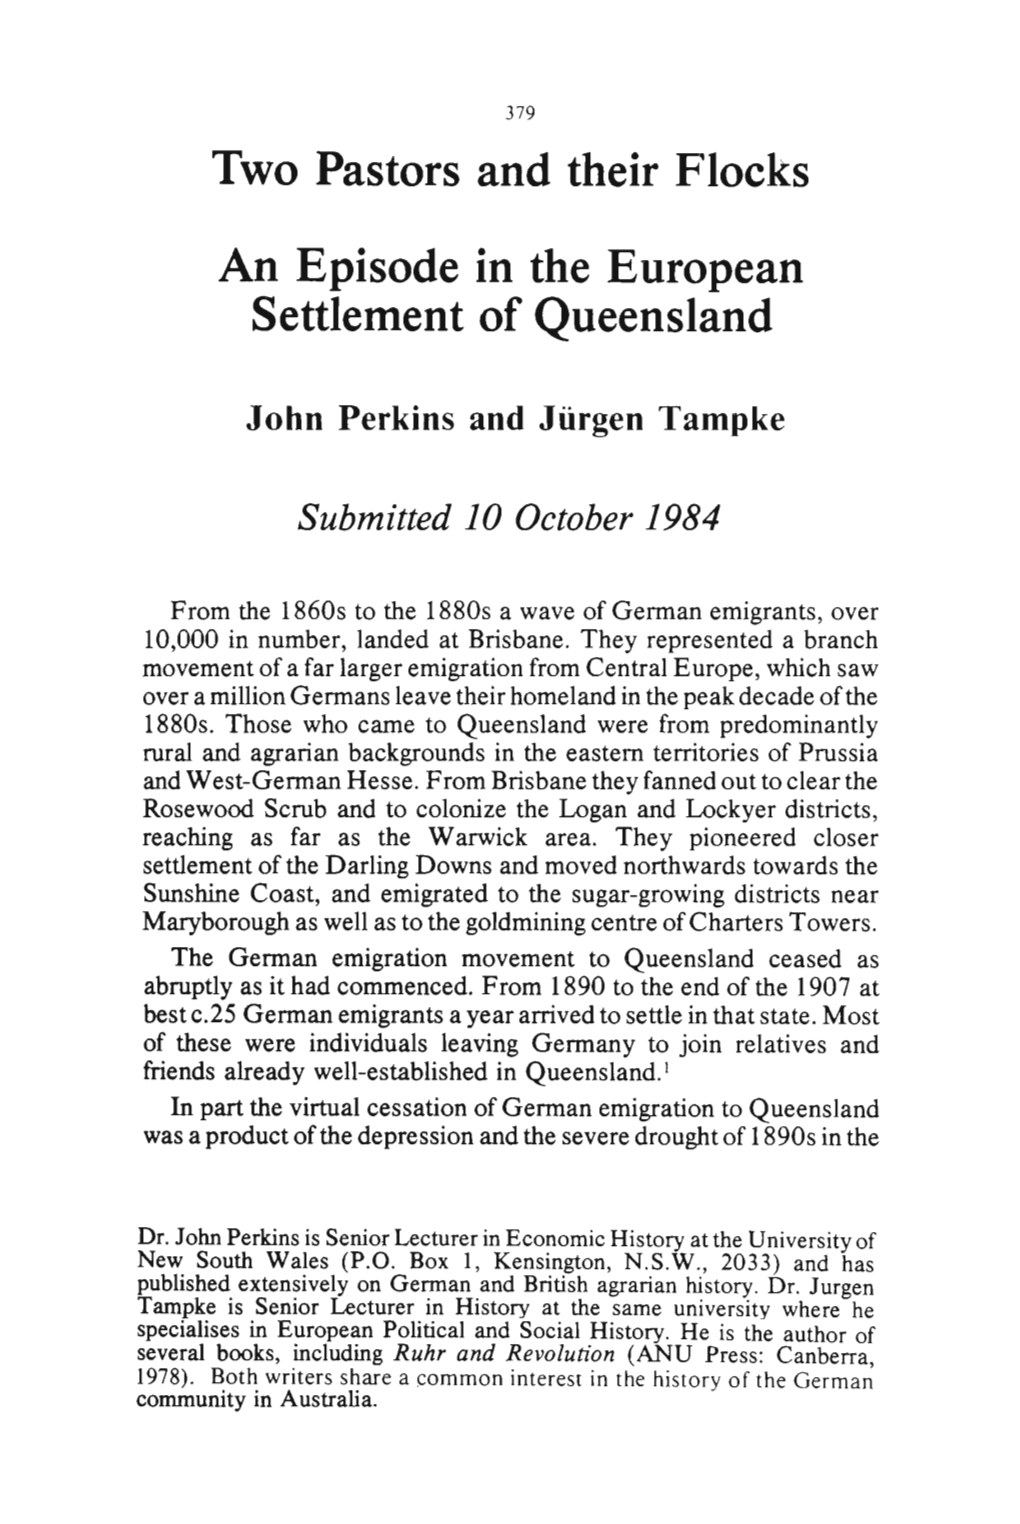 Two Pastors and Their Flocks an Episode in the European Settlement of Queensland